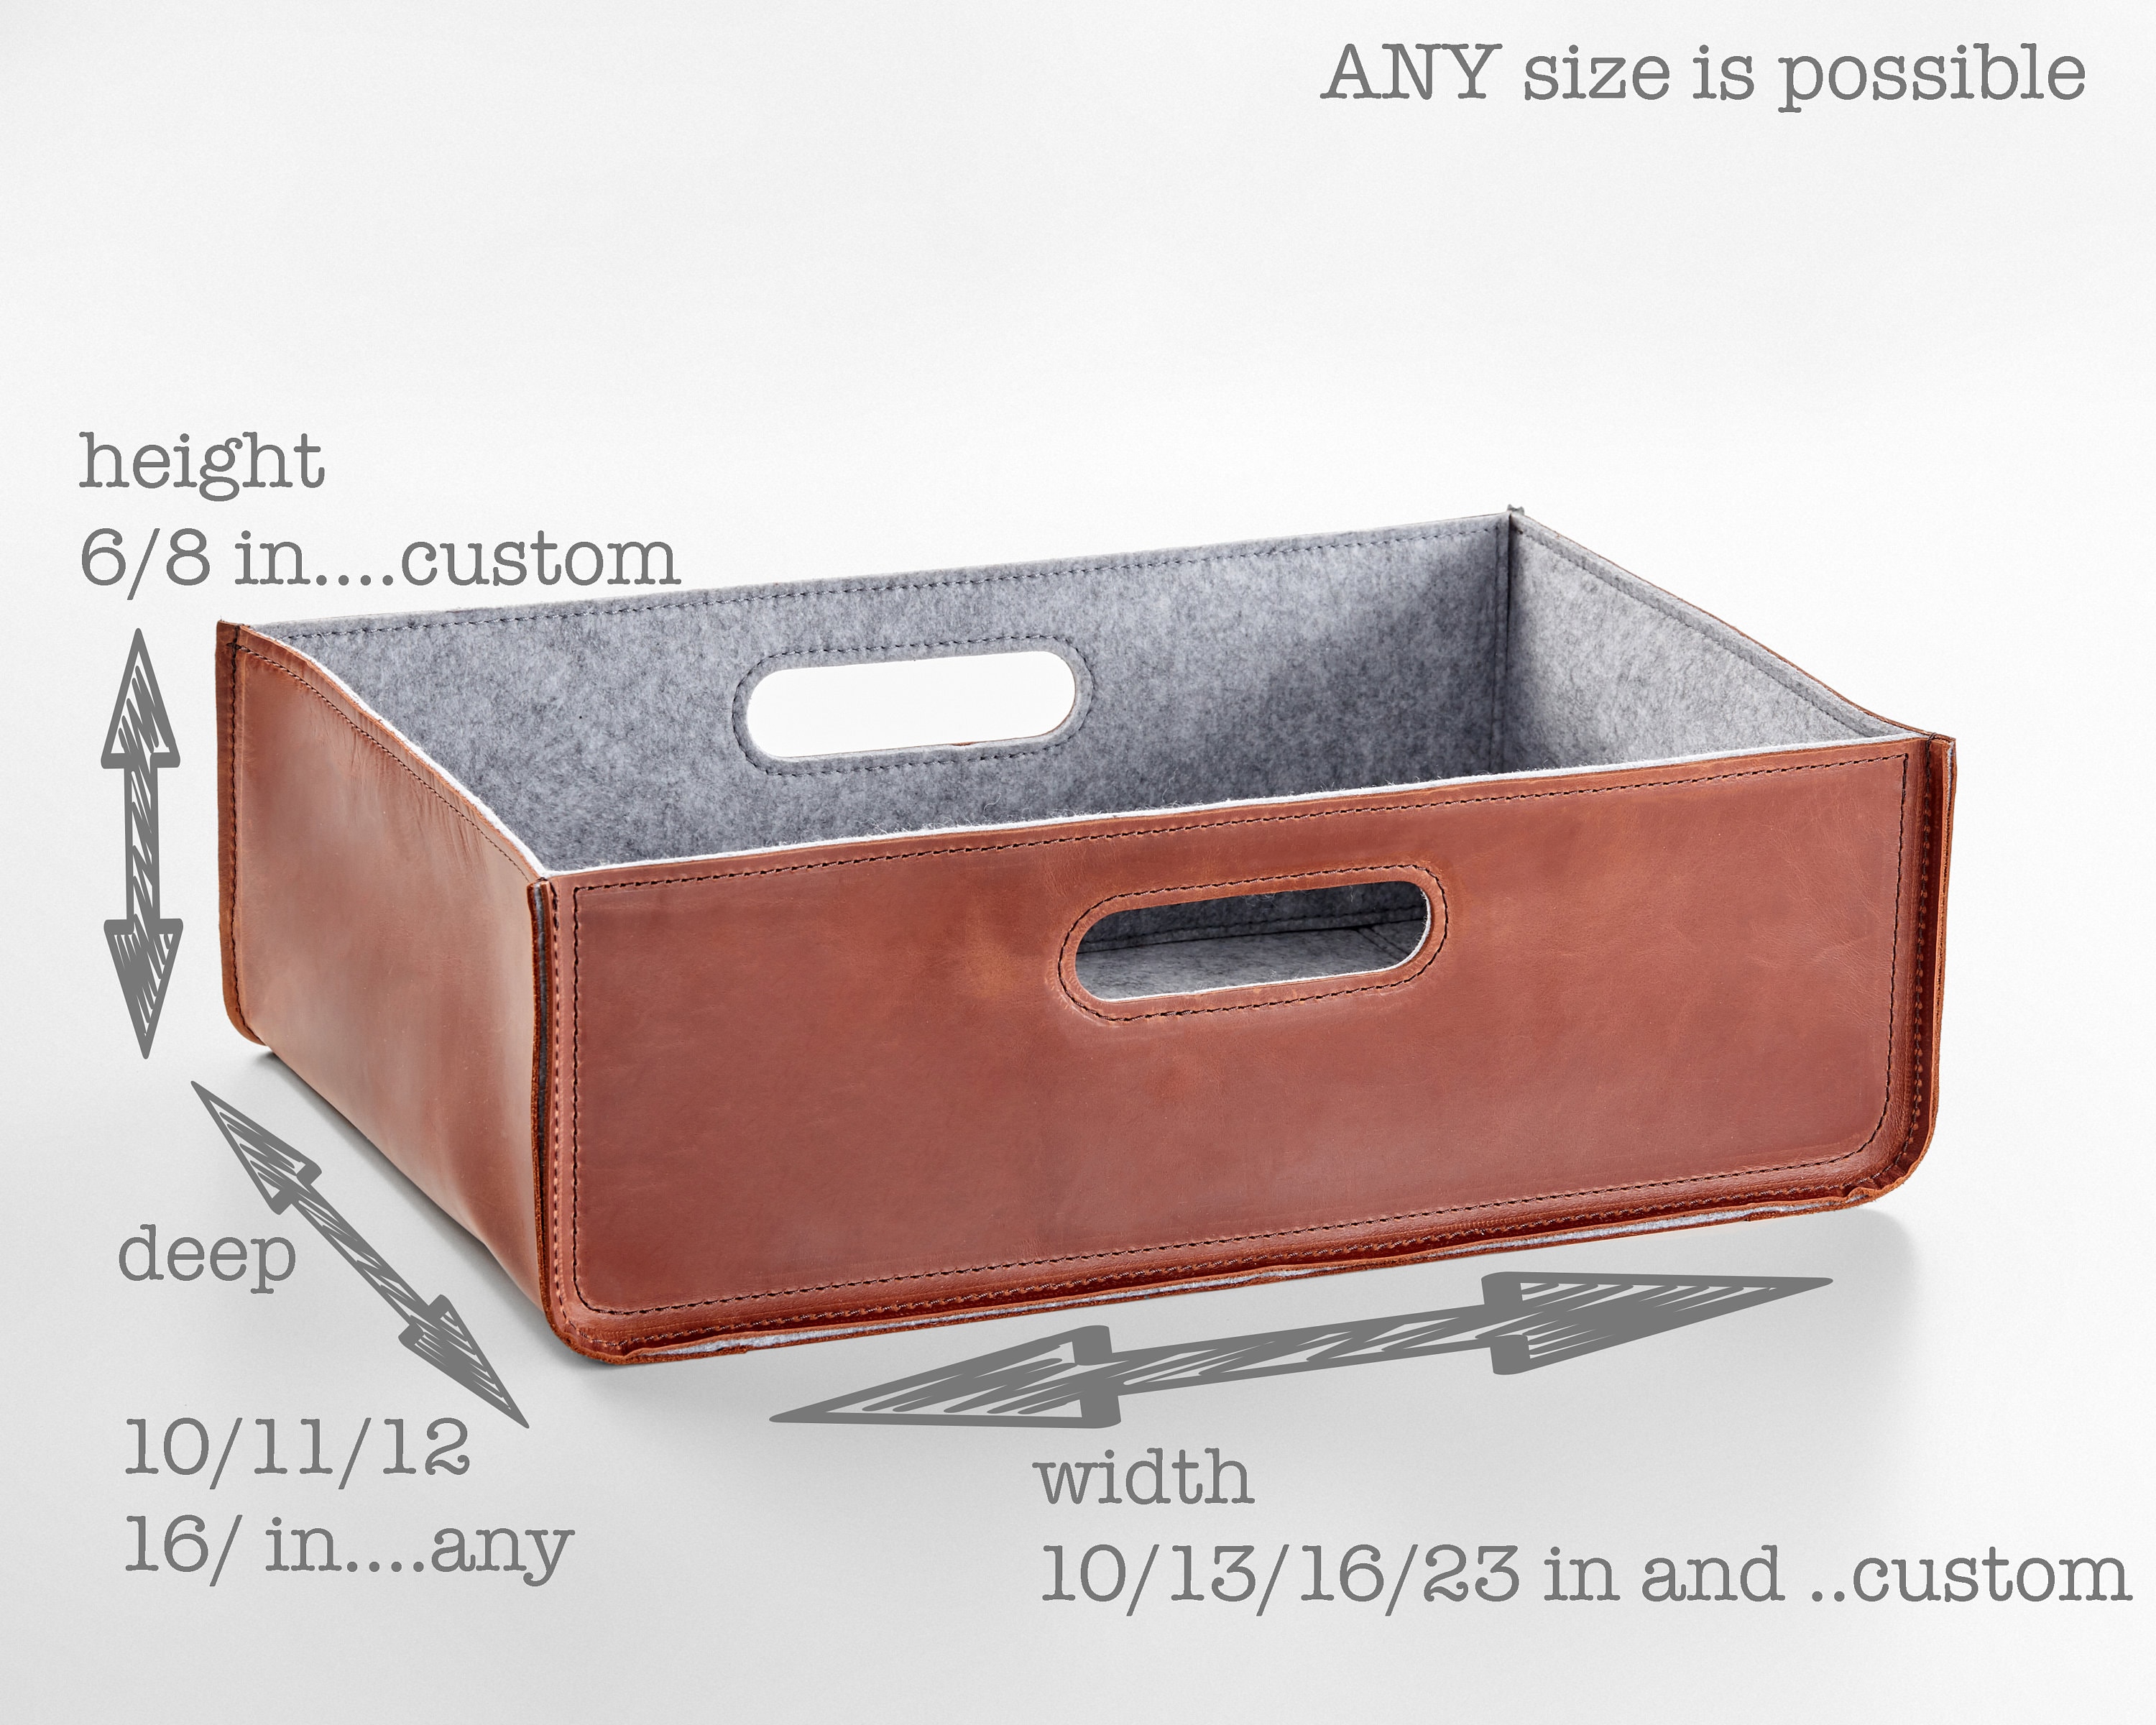 Leather Box for Storage and Organization With Separations for Diferent  Items. Custom Size 